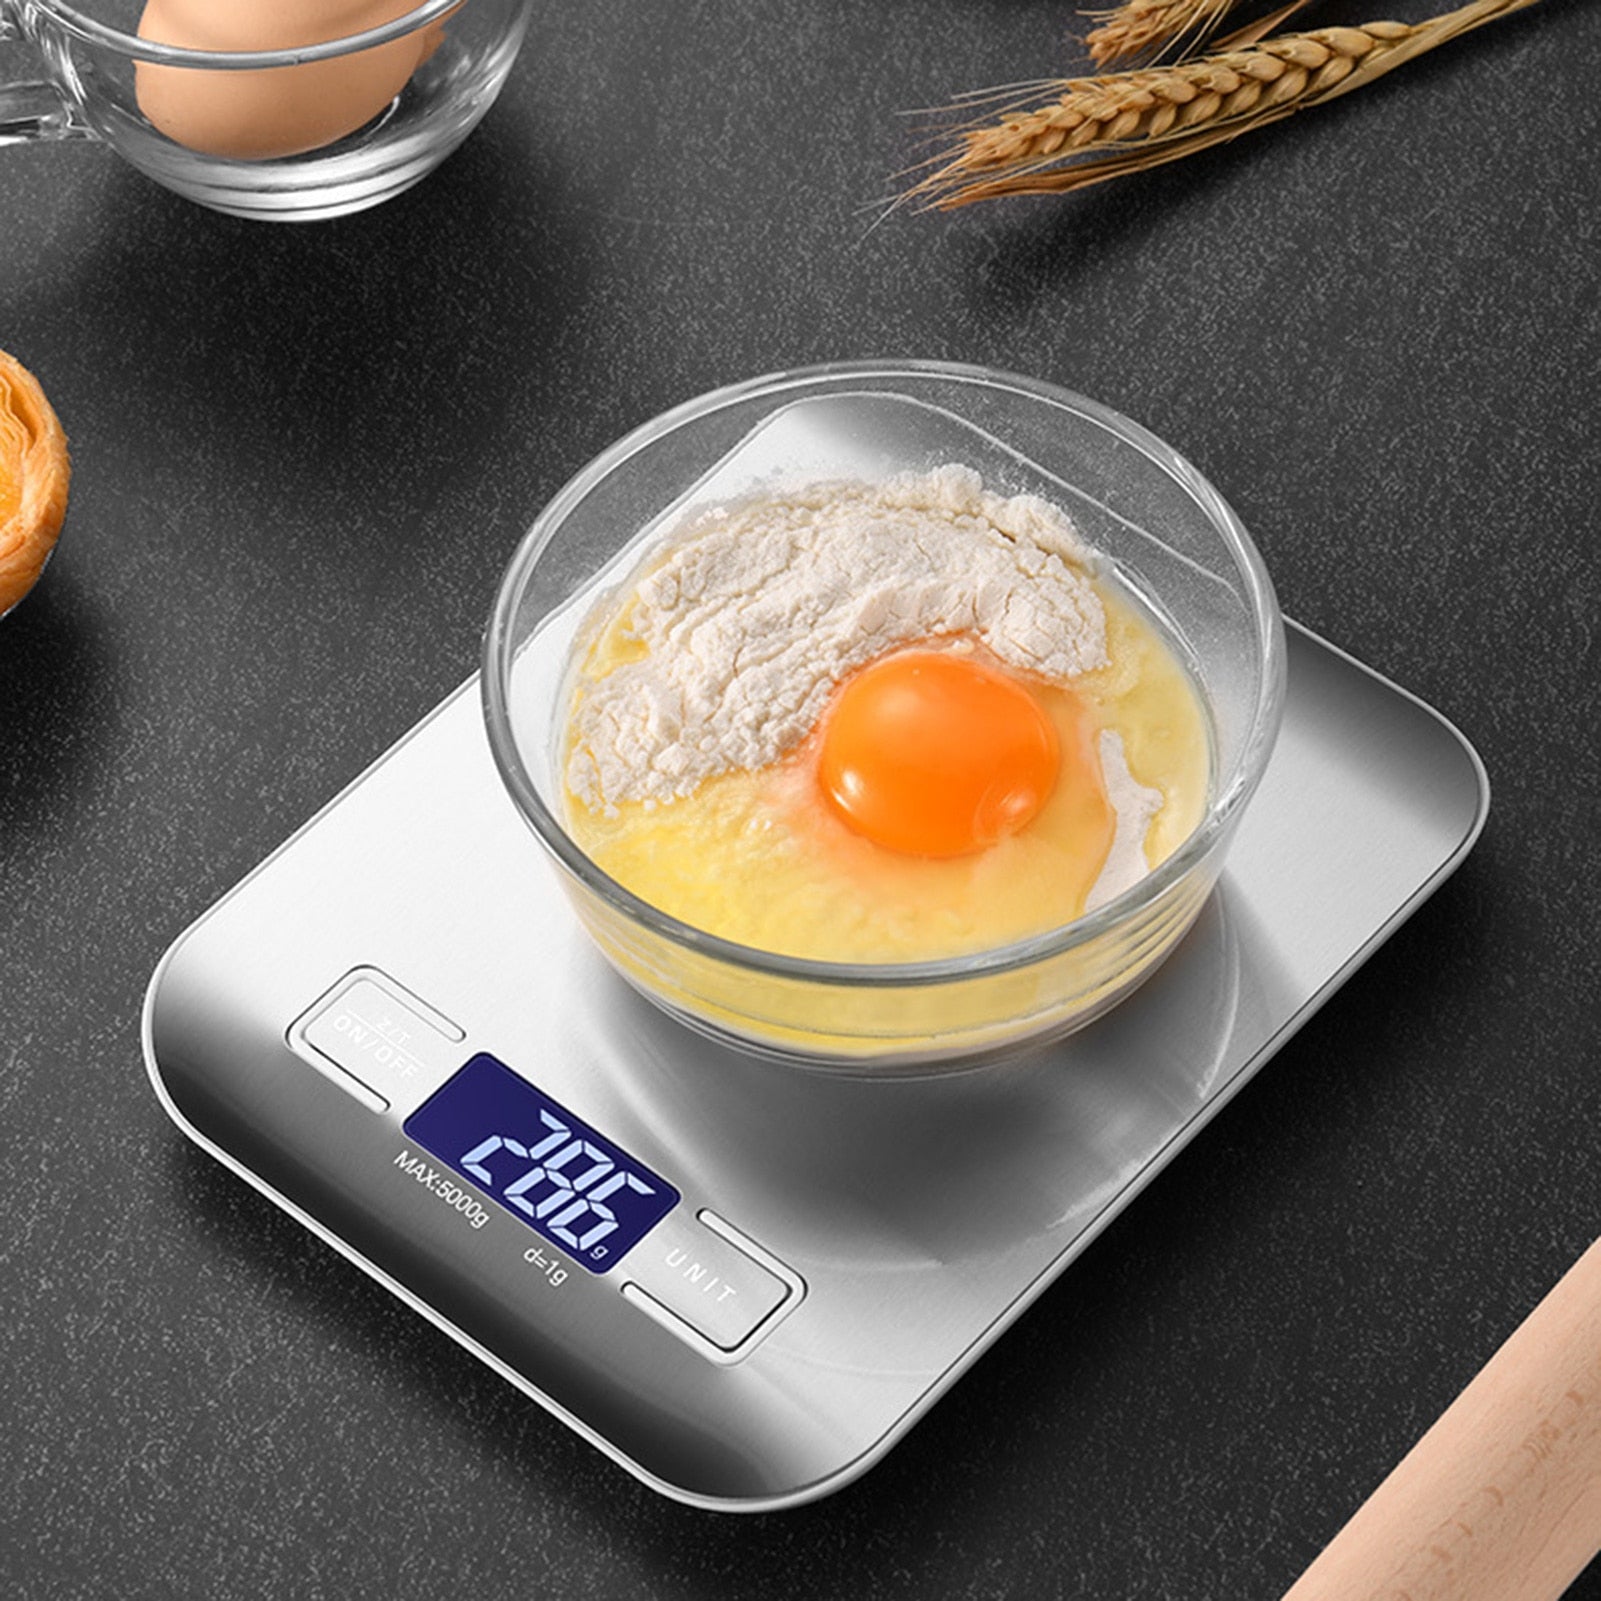 Stainless Steel Digital Kitchen Scale - Electronic LCD Display for Precise Weighing